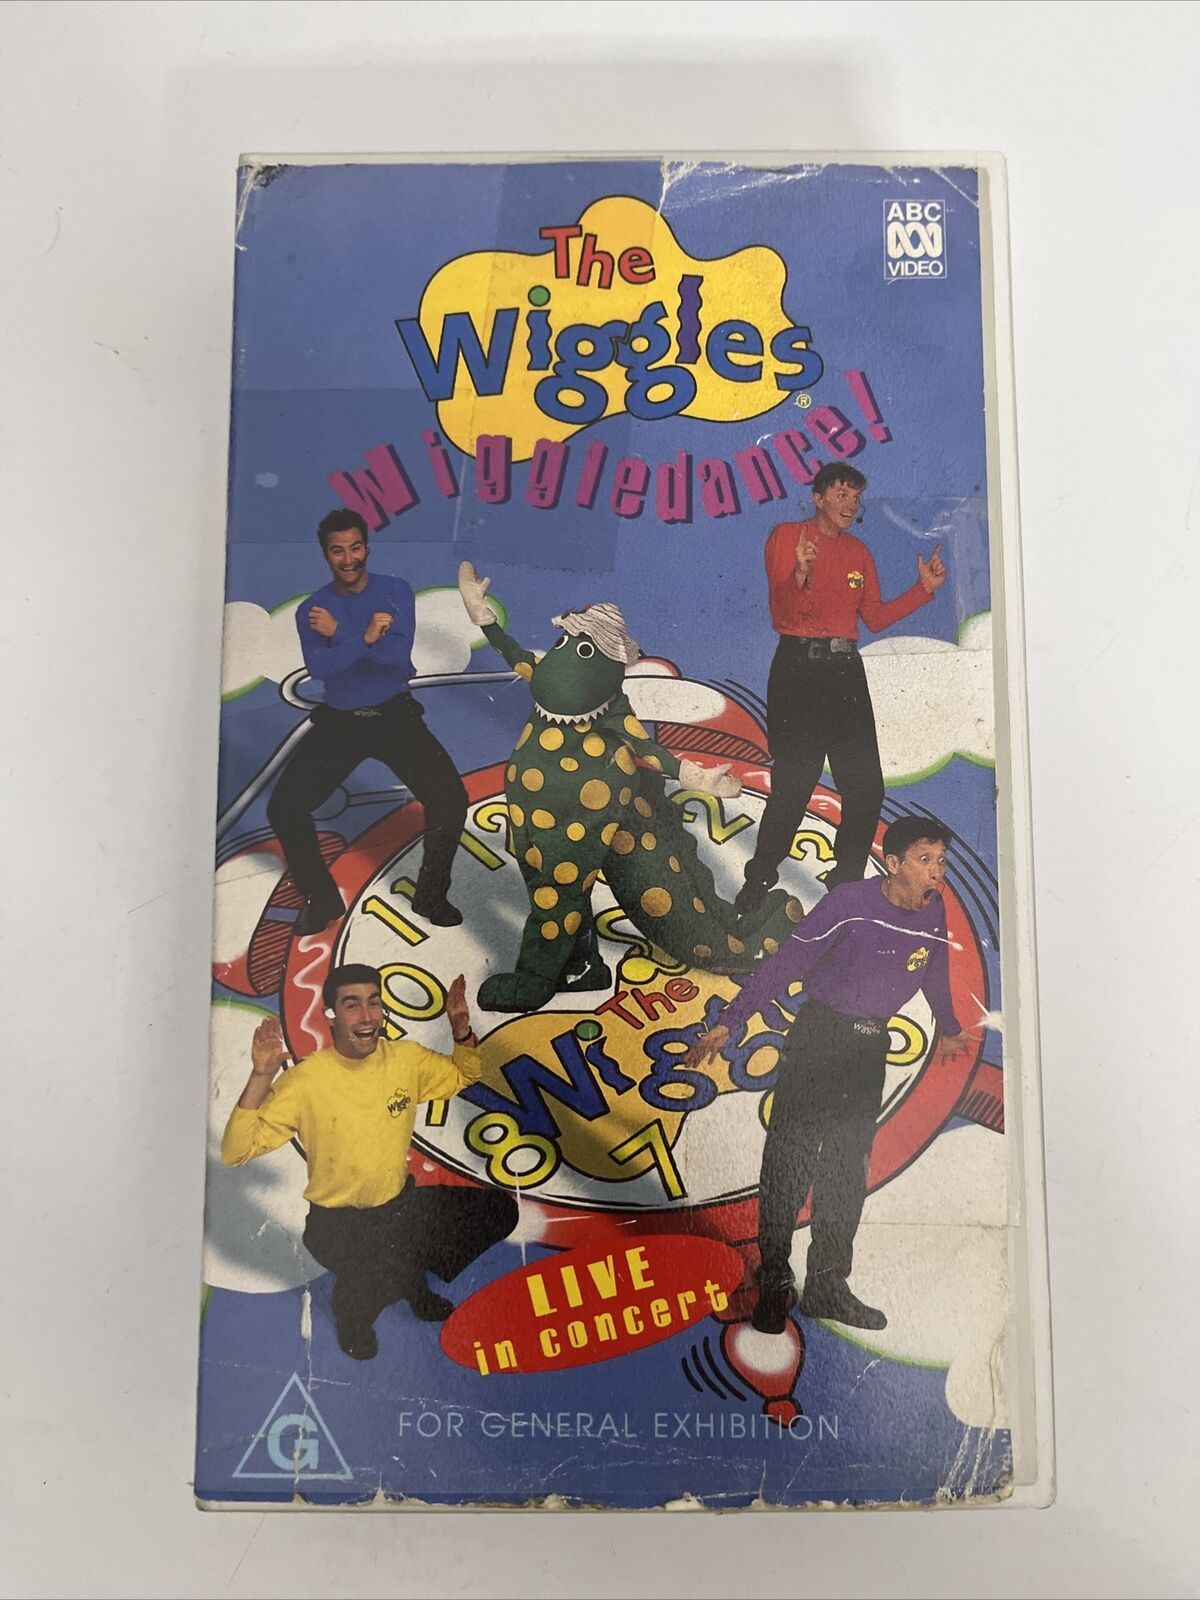 The Wiggles - Wiggledance Live In Concert VHS 1997 PAL